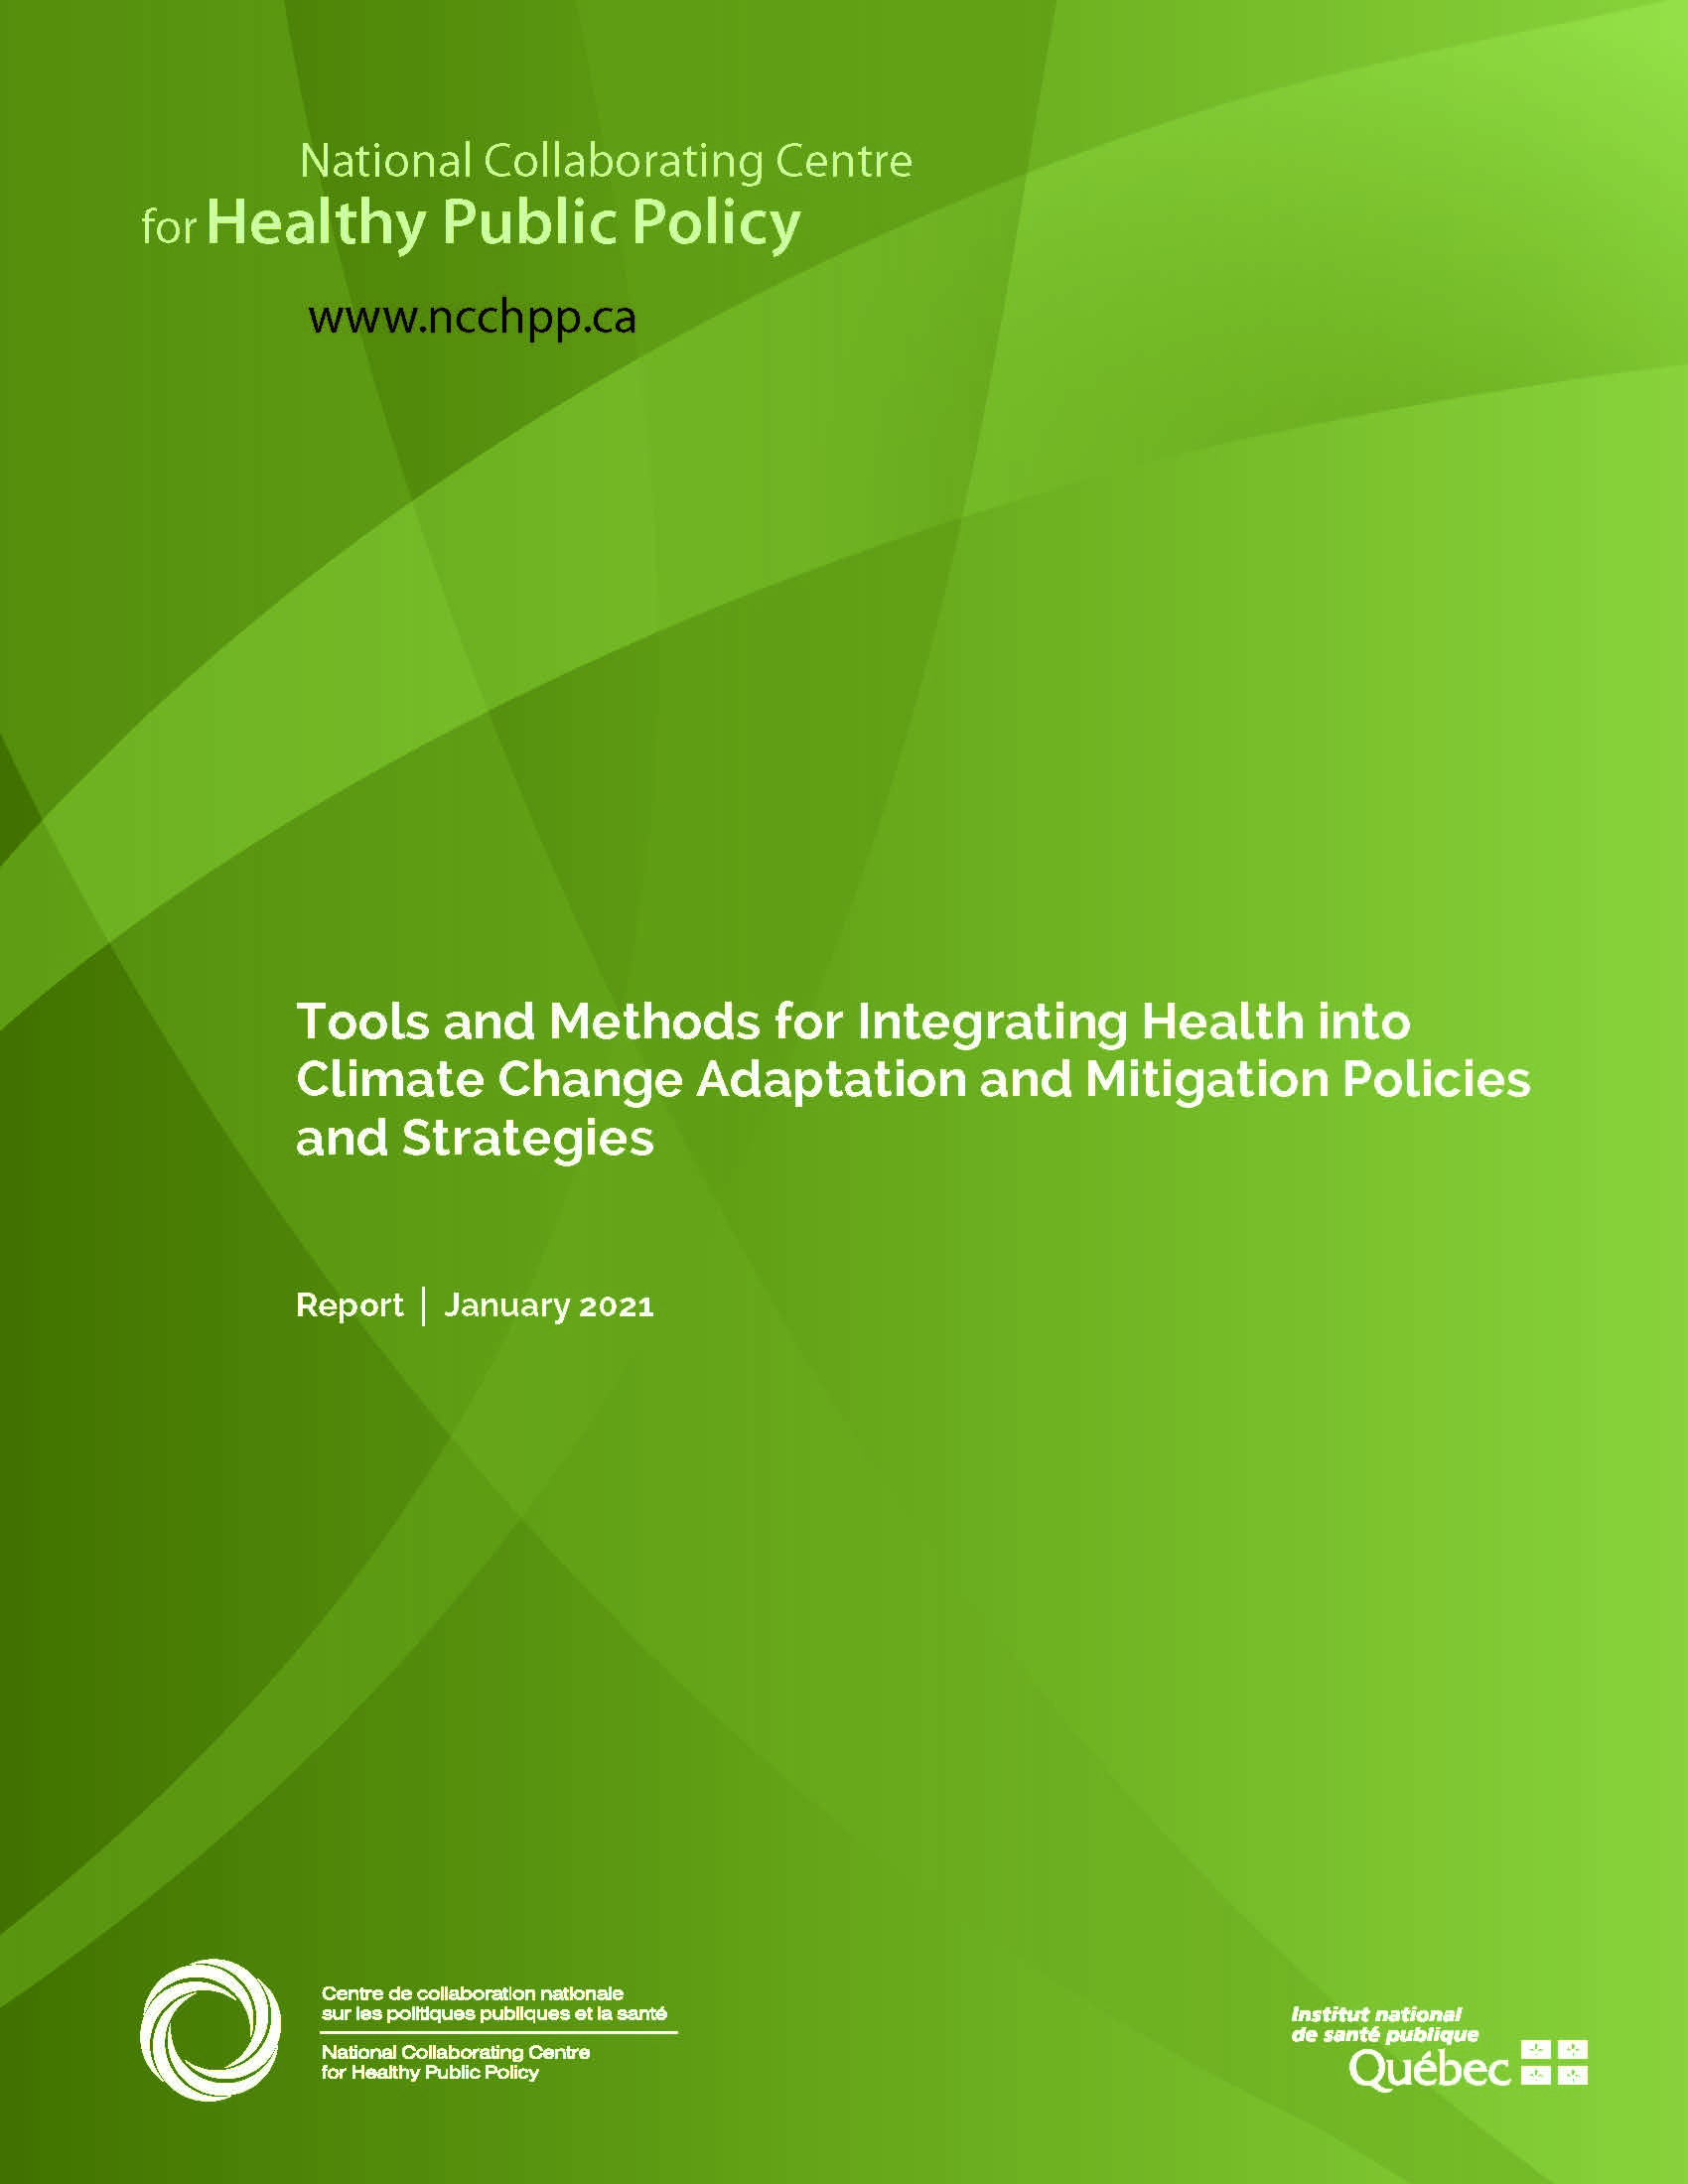 Tools and Methods for Integrating Health into Climate Change Adaptation and Mitigation Policies and Strategies